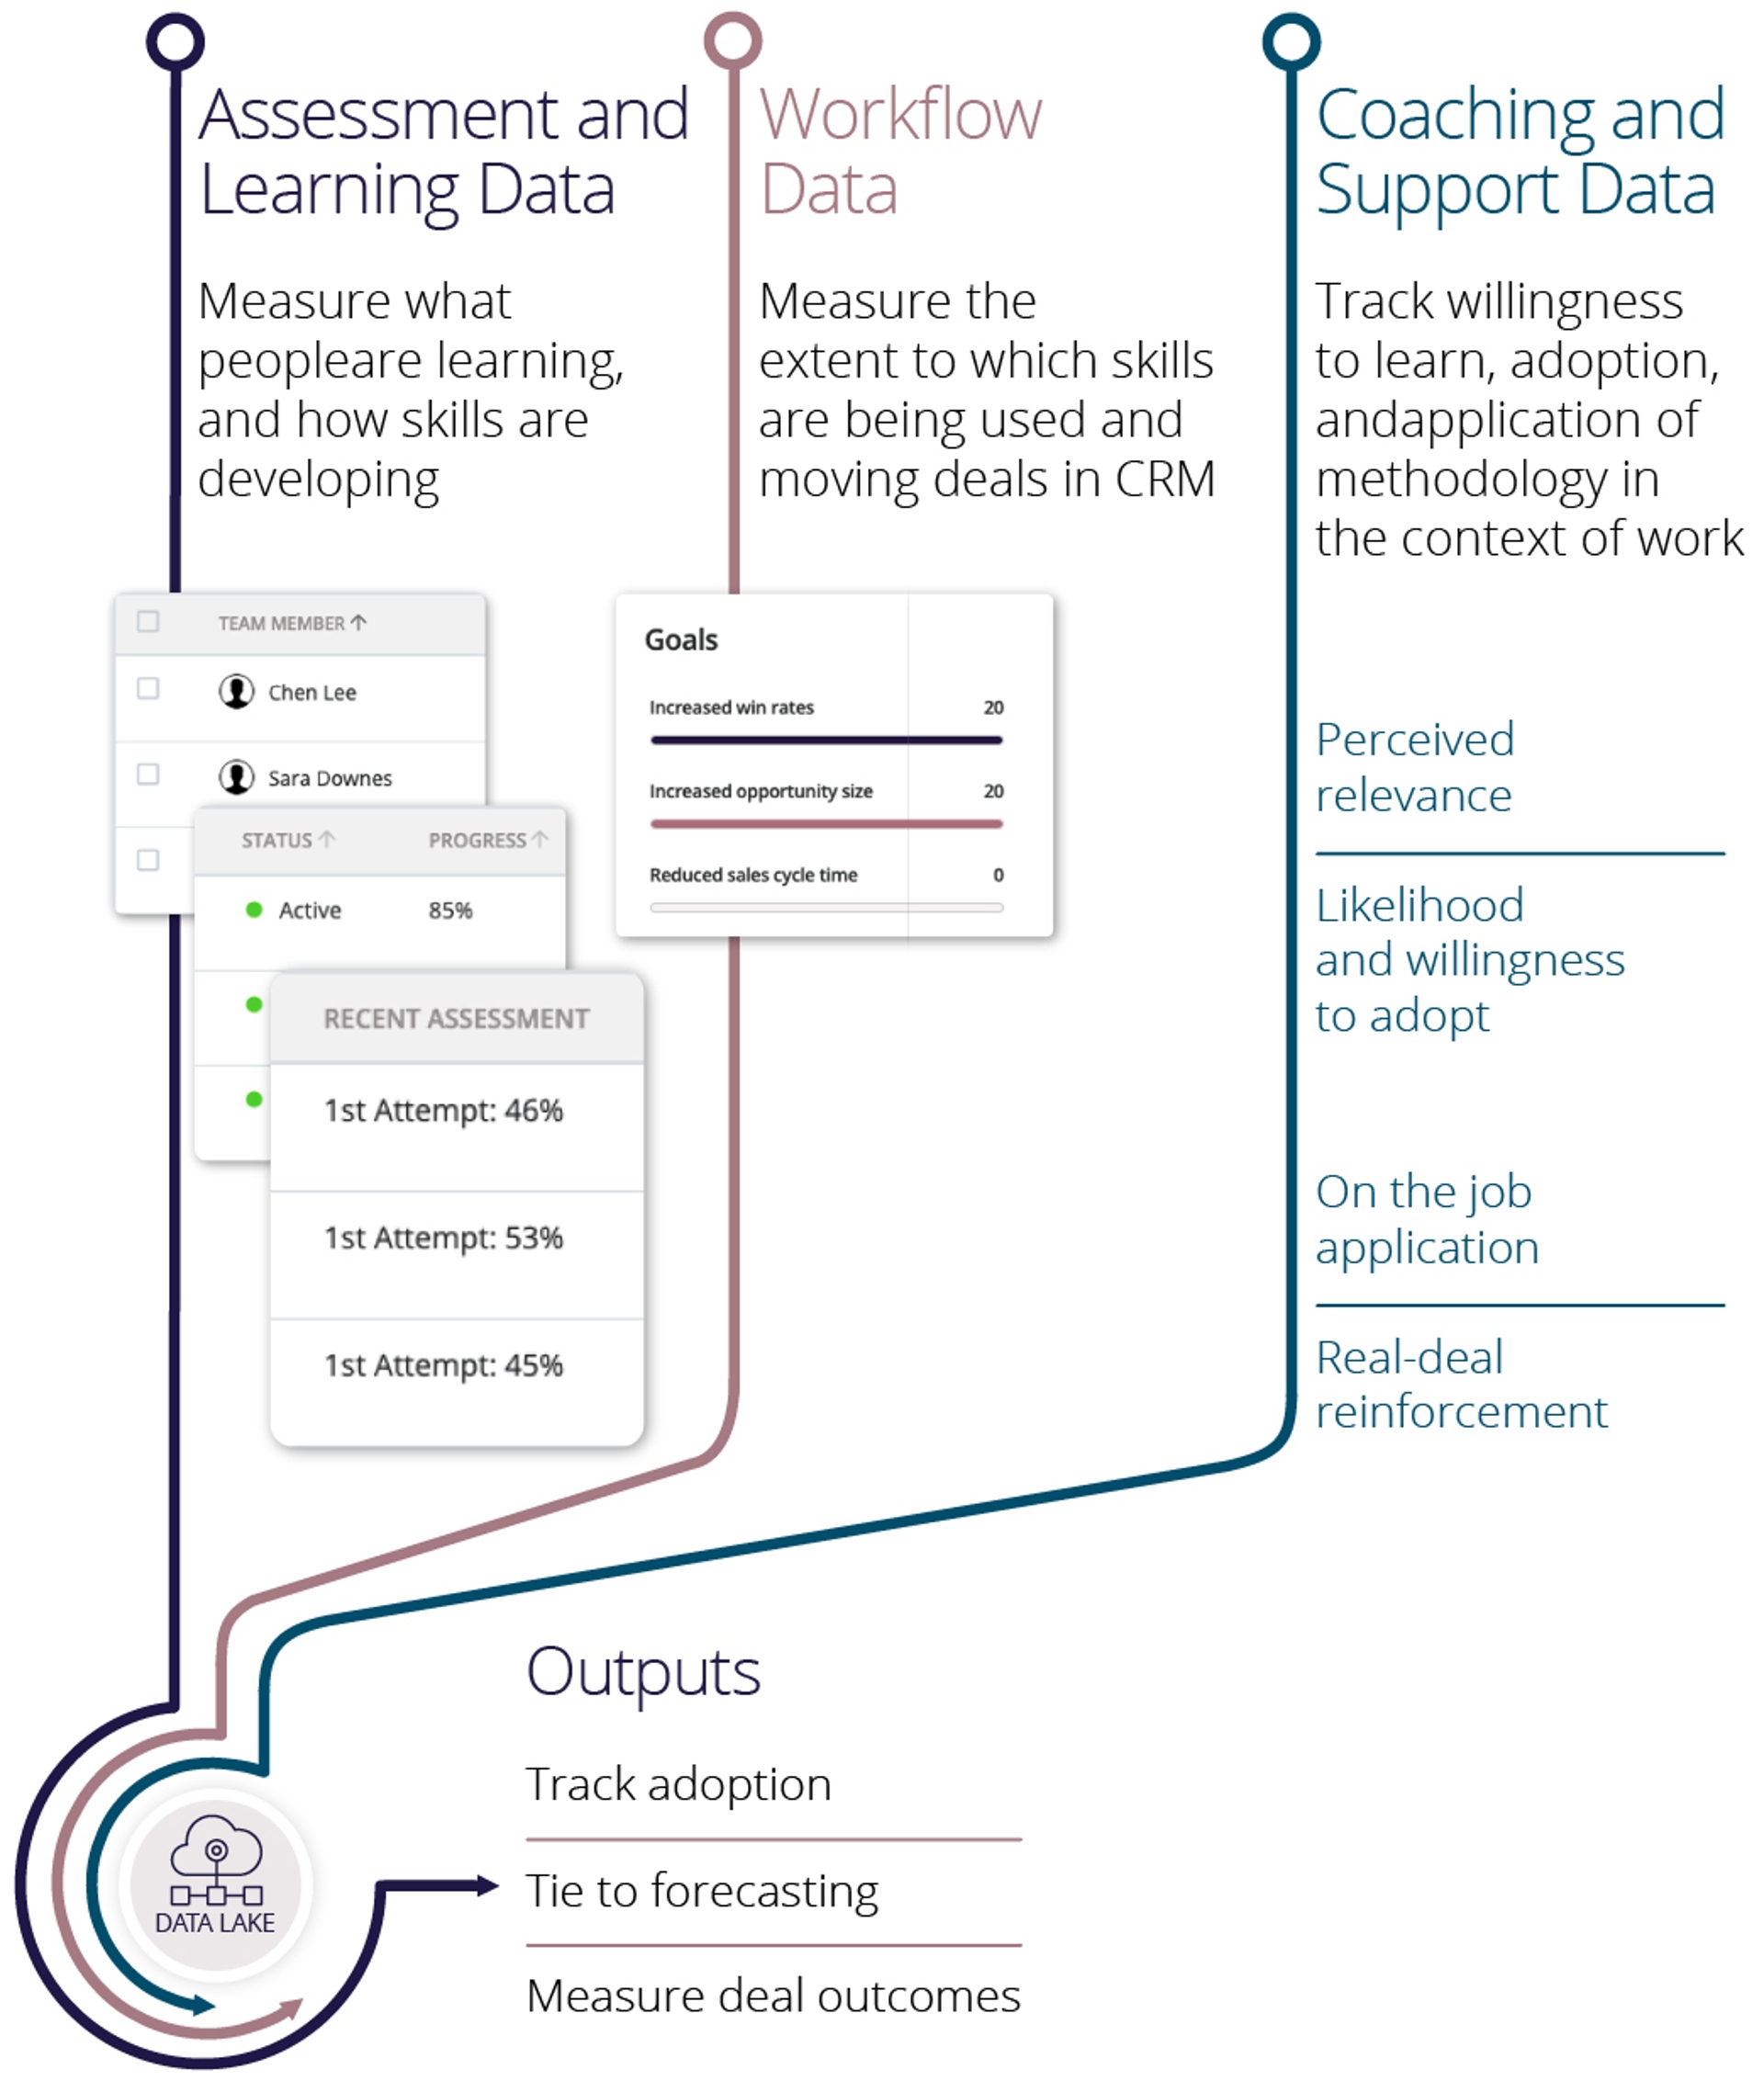 graphic showing how assessment and learning data, workflow data and coaching and support data are combined to create actionable analytics dashboards for sales teams